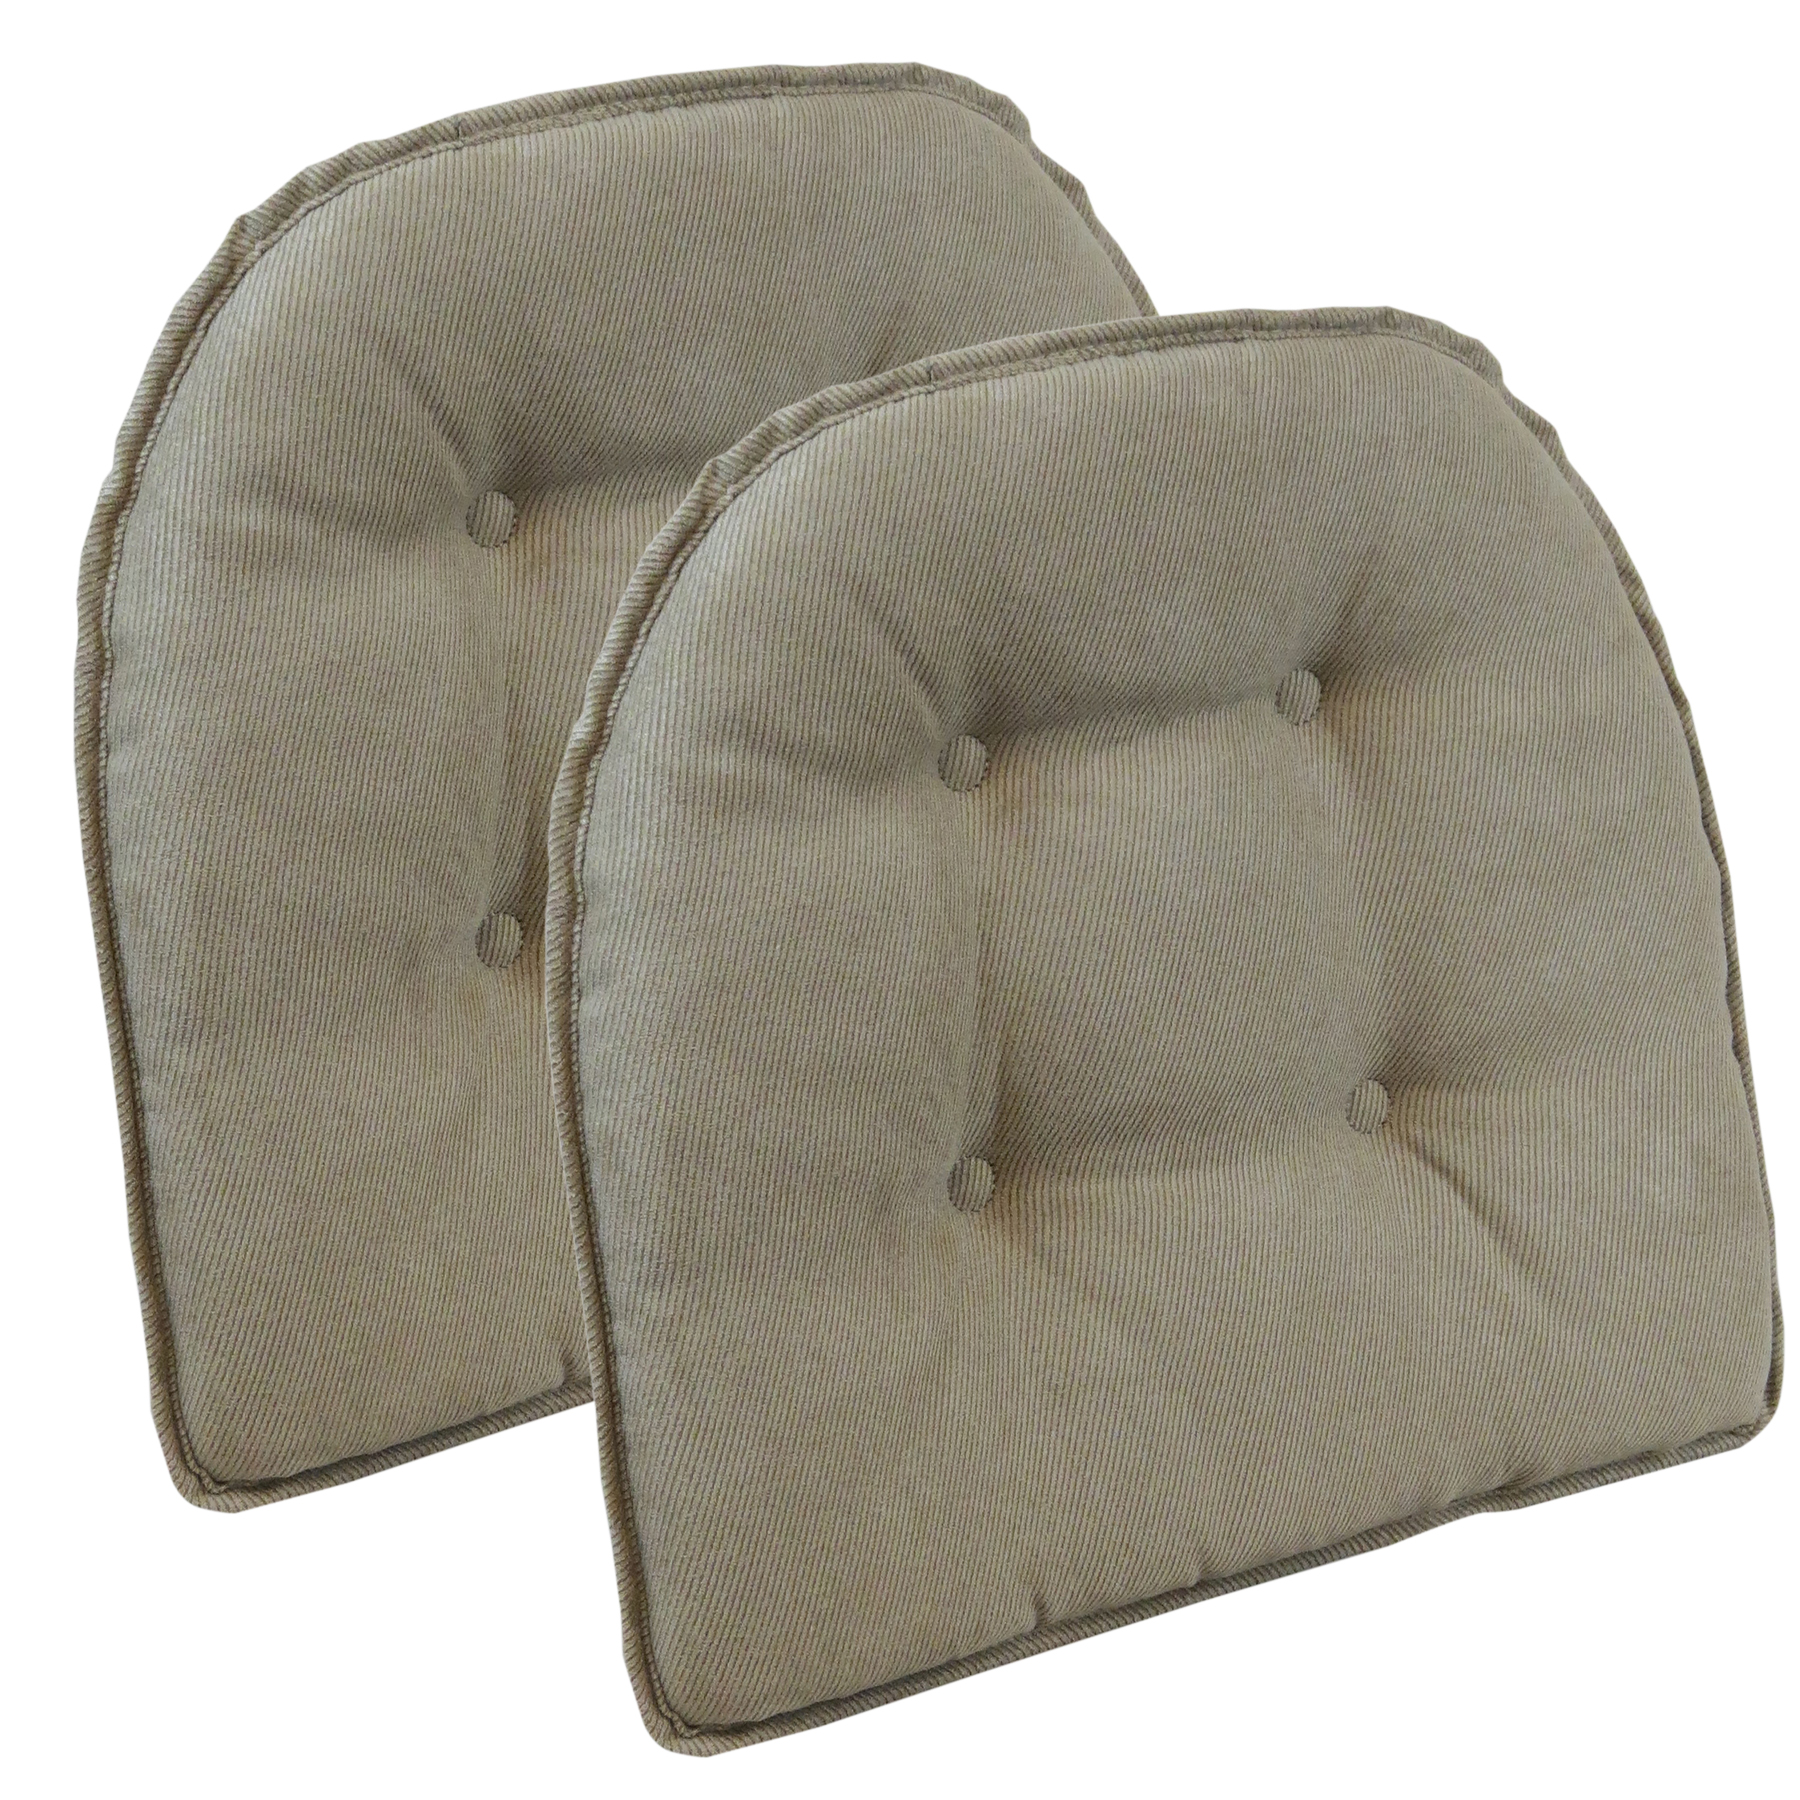 The Gripper Non-Slip Twillo Tufted Chair Cushions, Set of 2